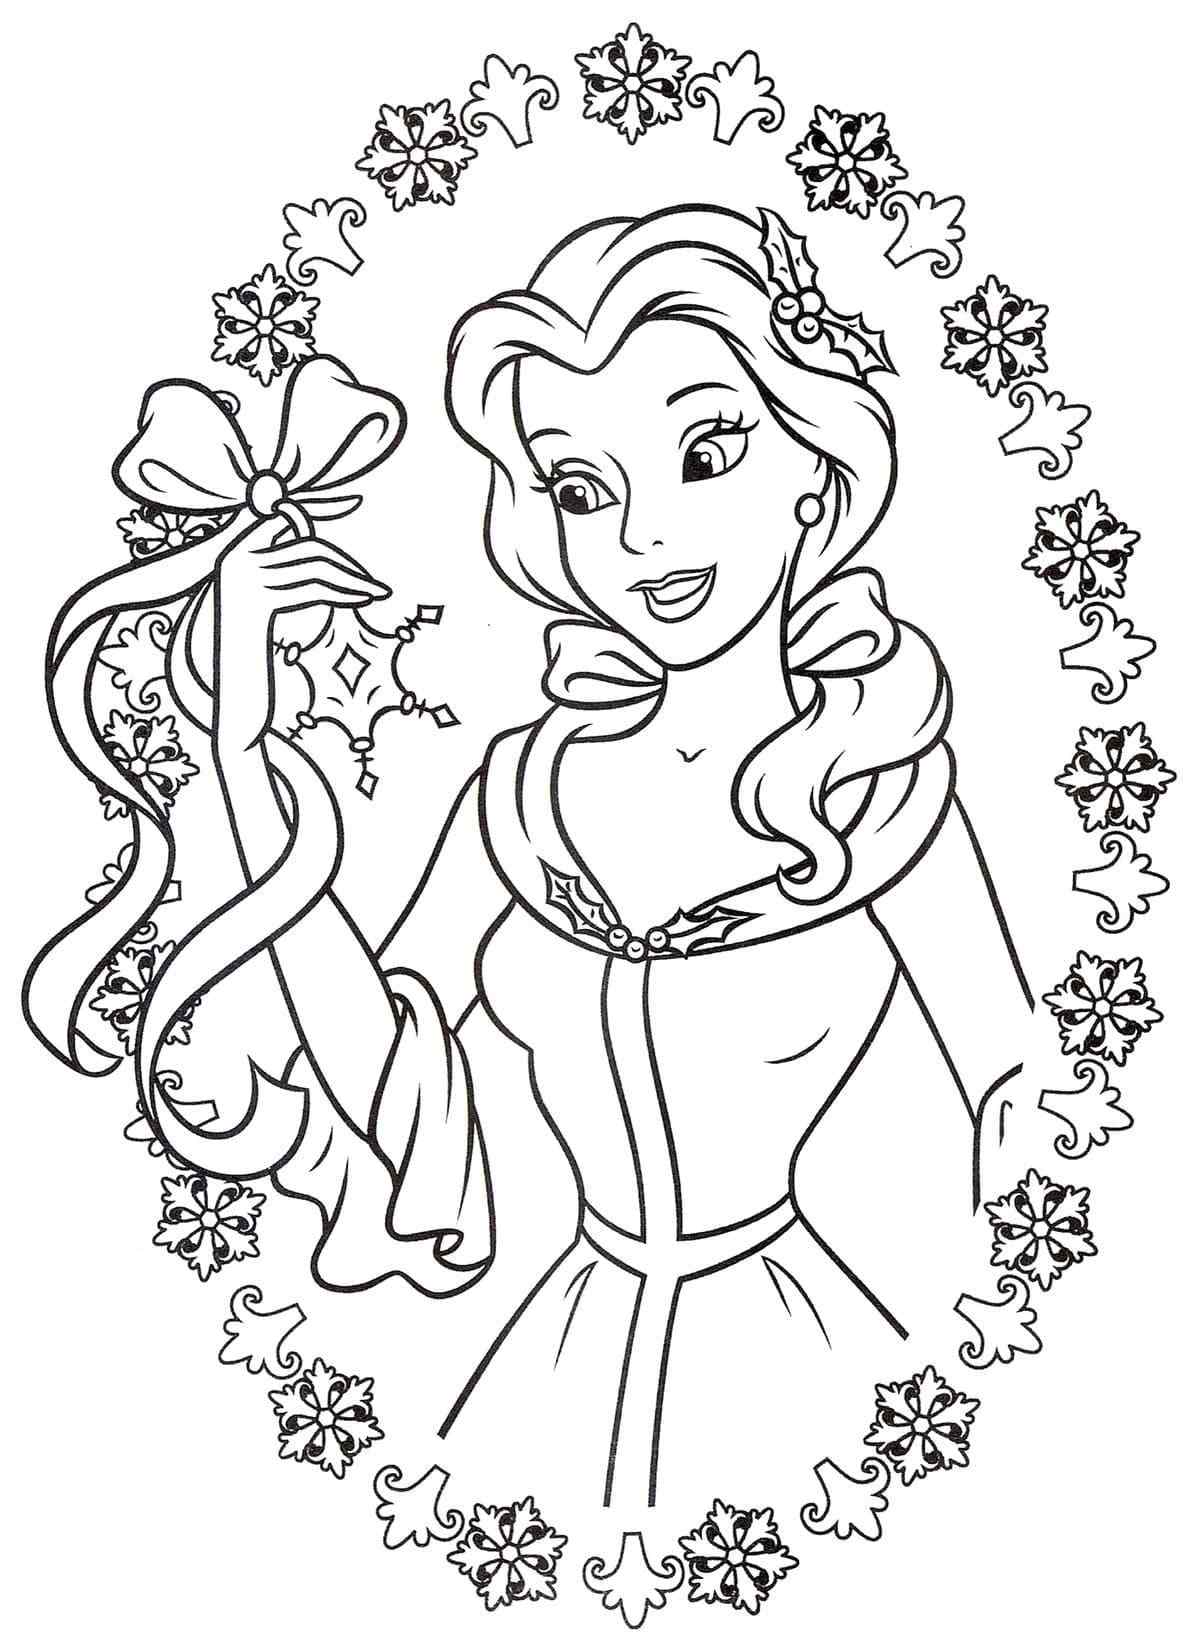 Disney Princess For Kids Coloring Page